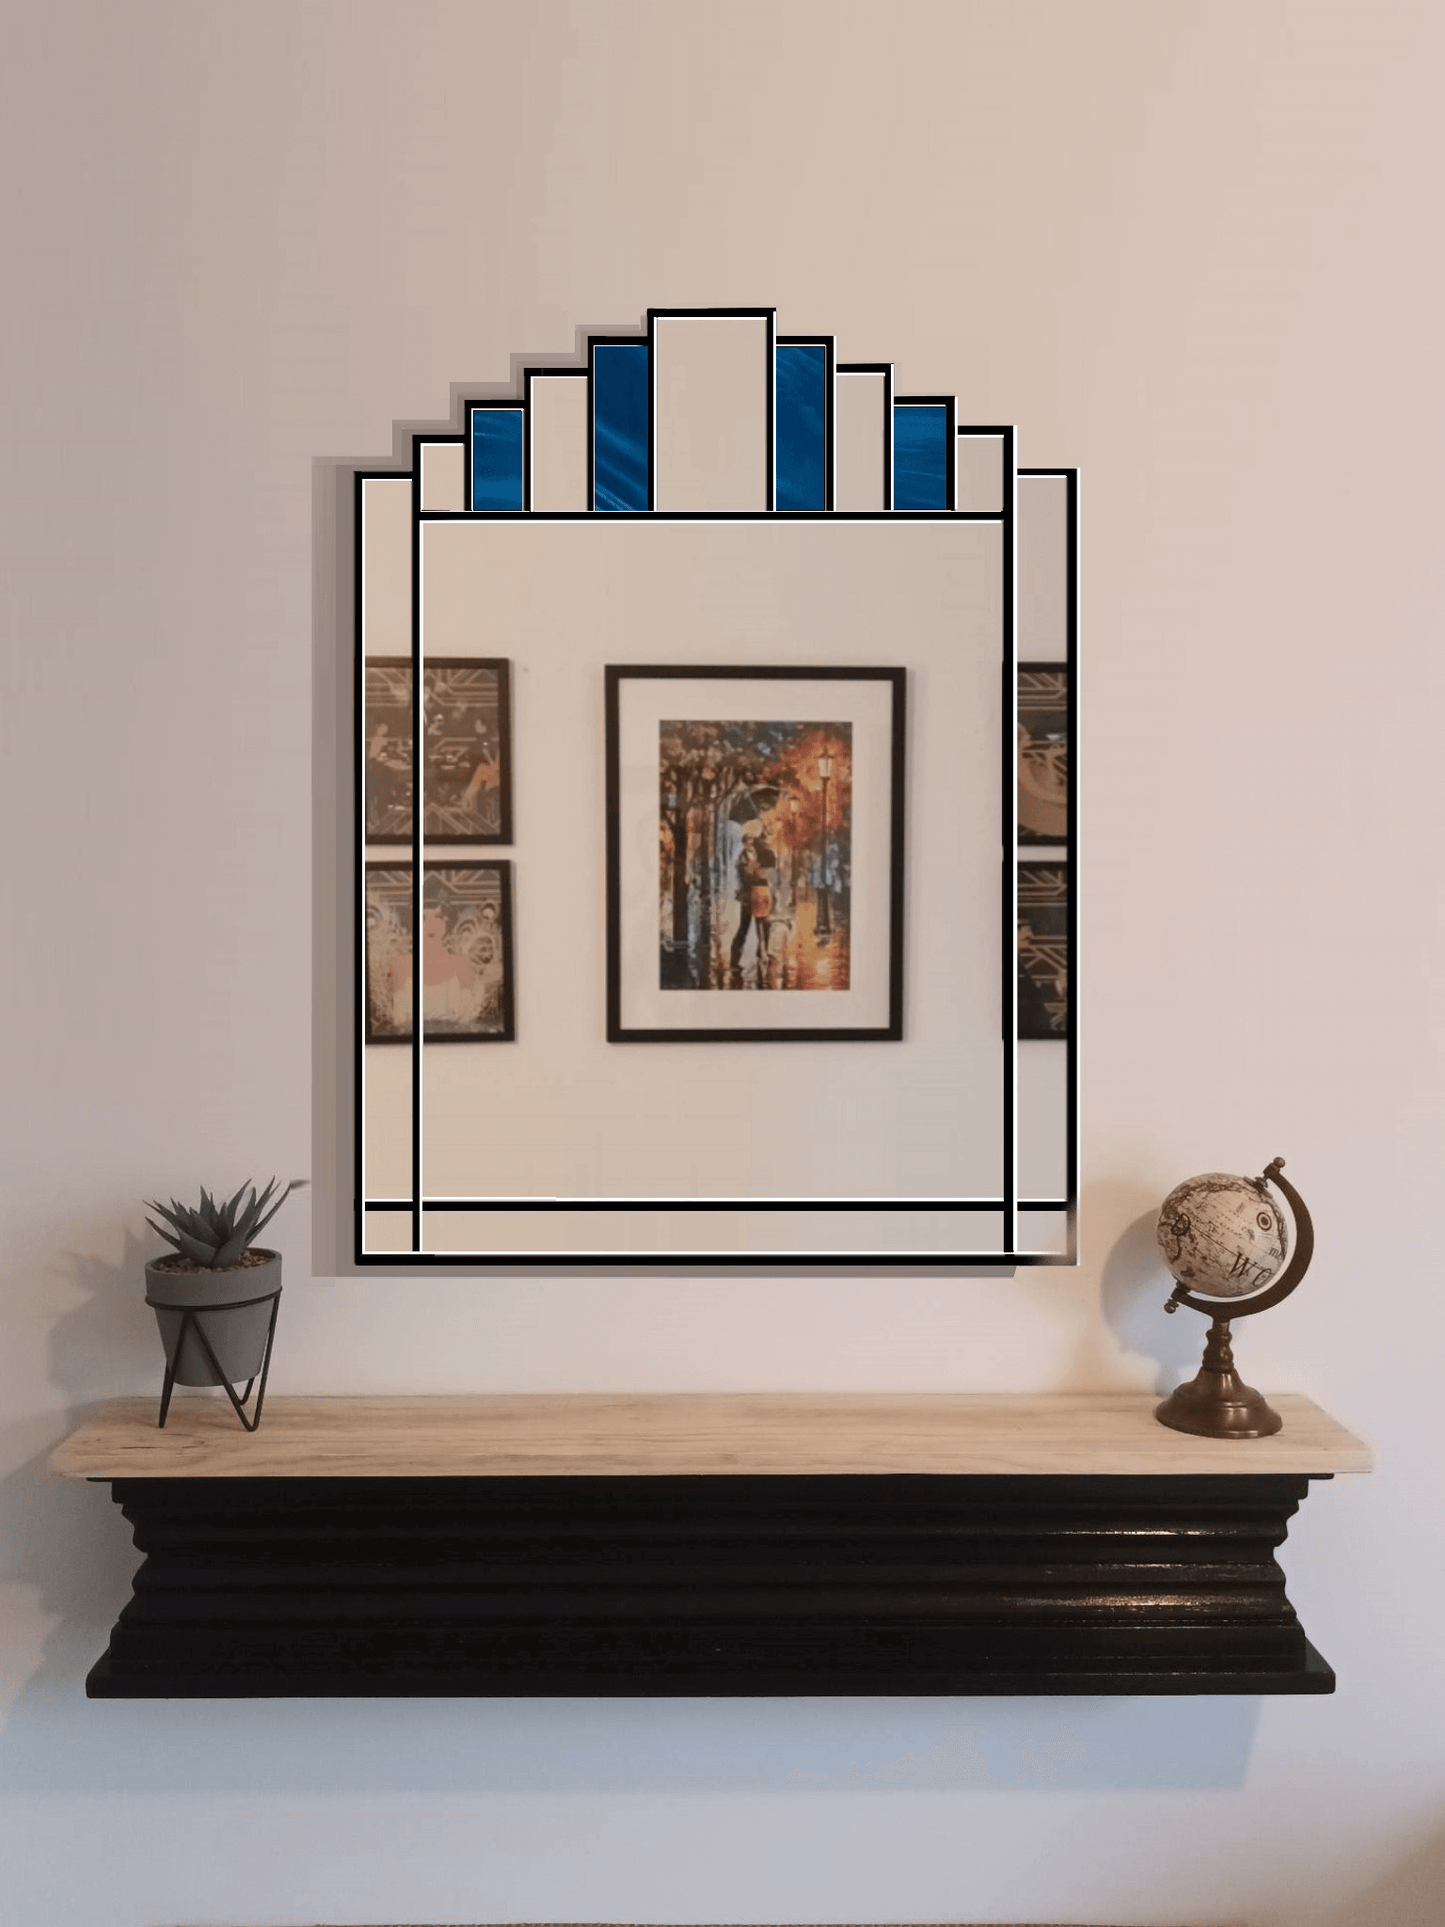 Blue Stain Glass Art Deco 1930's Style Wall Mirror